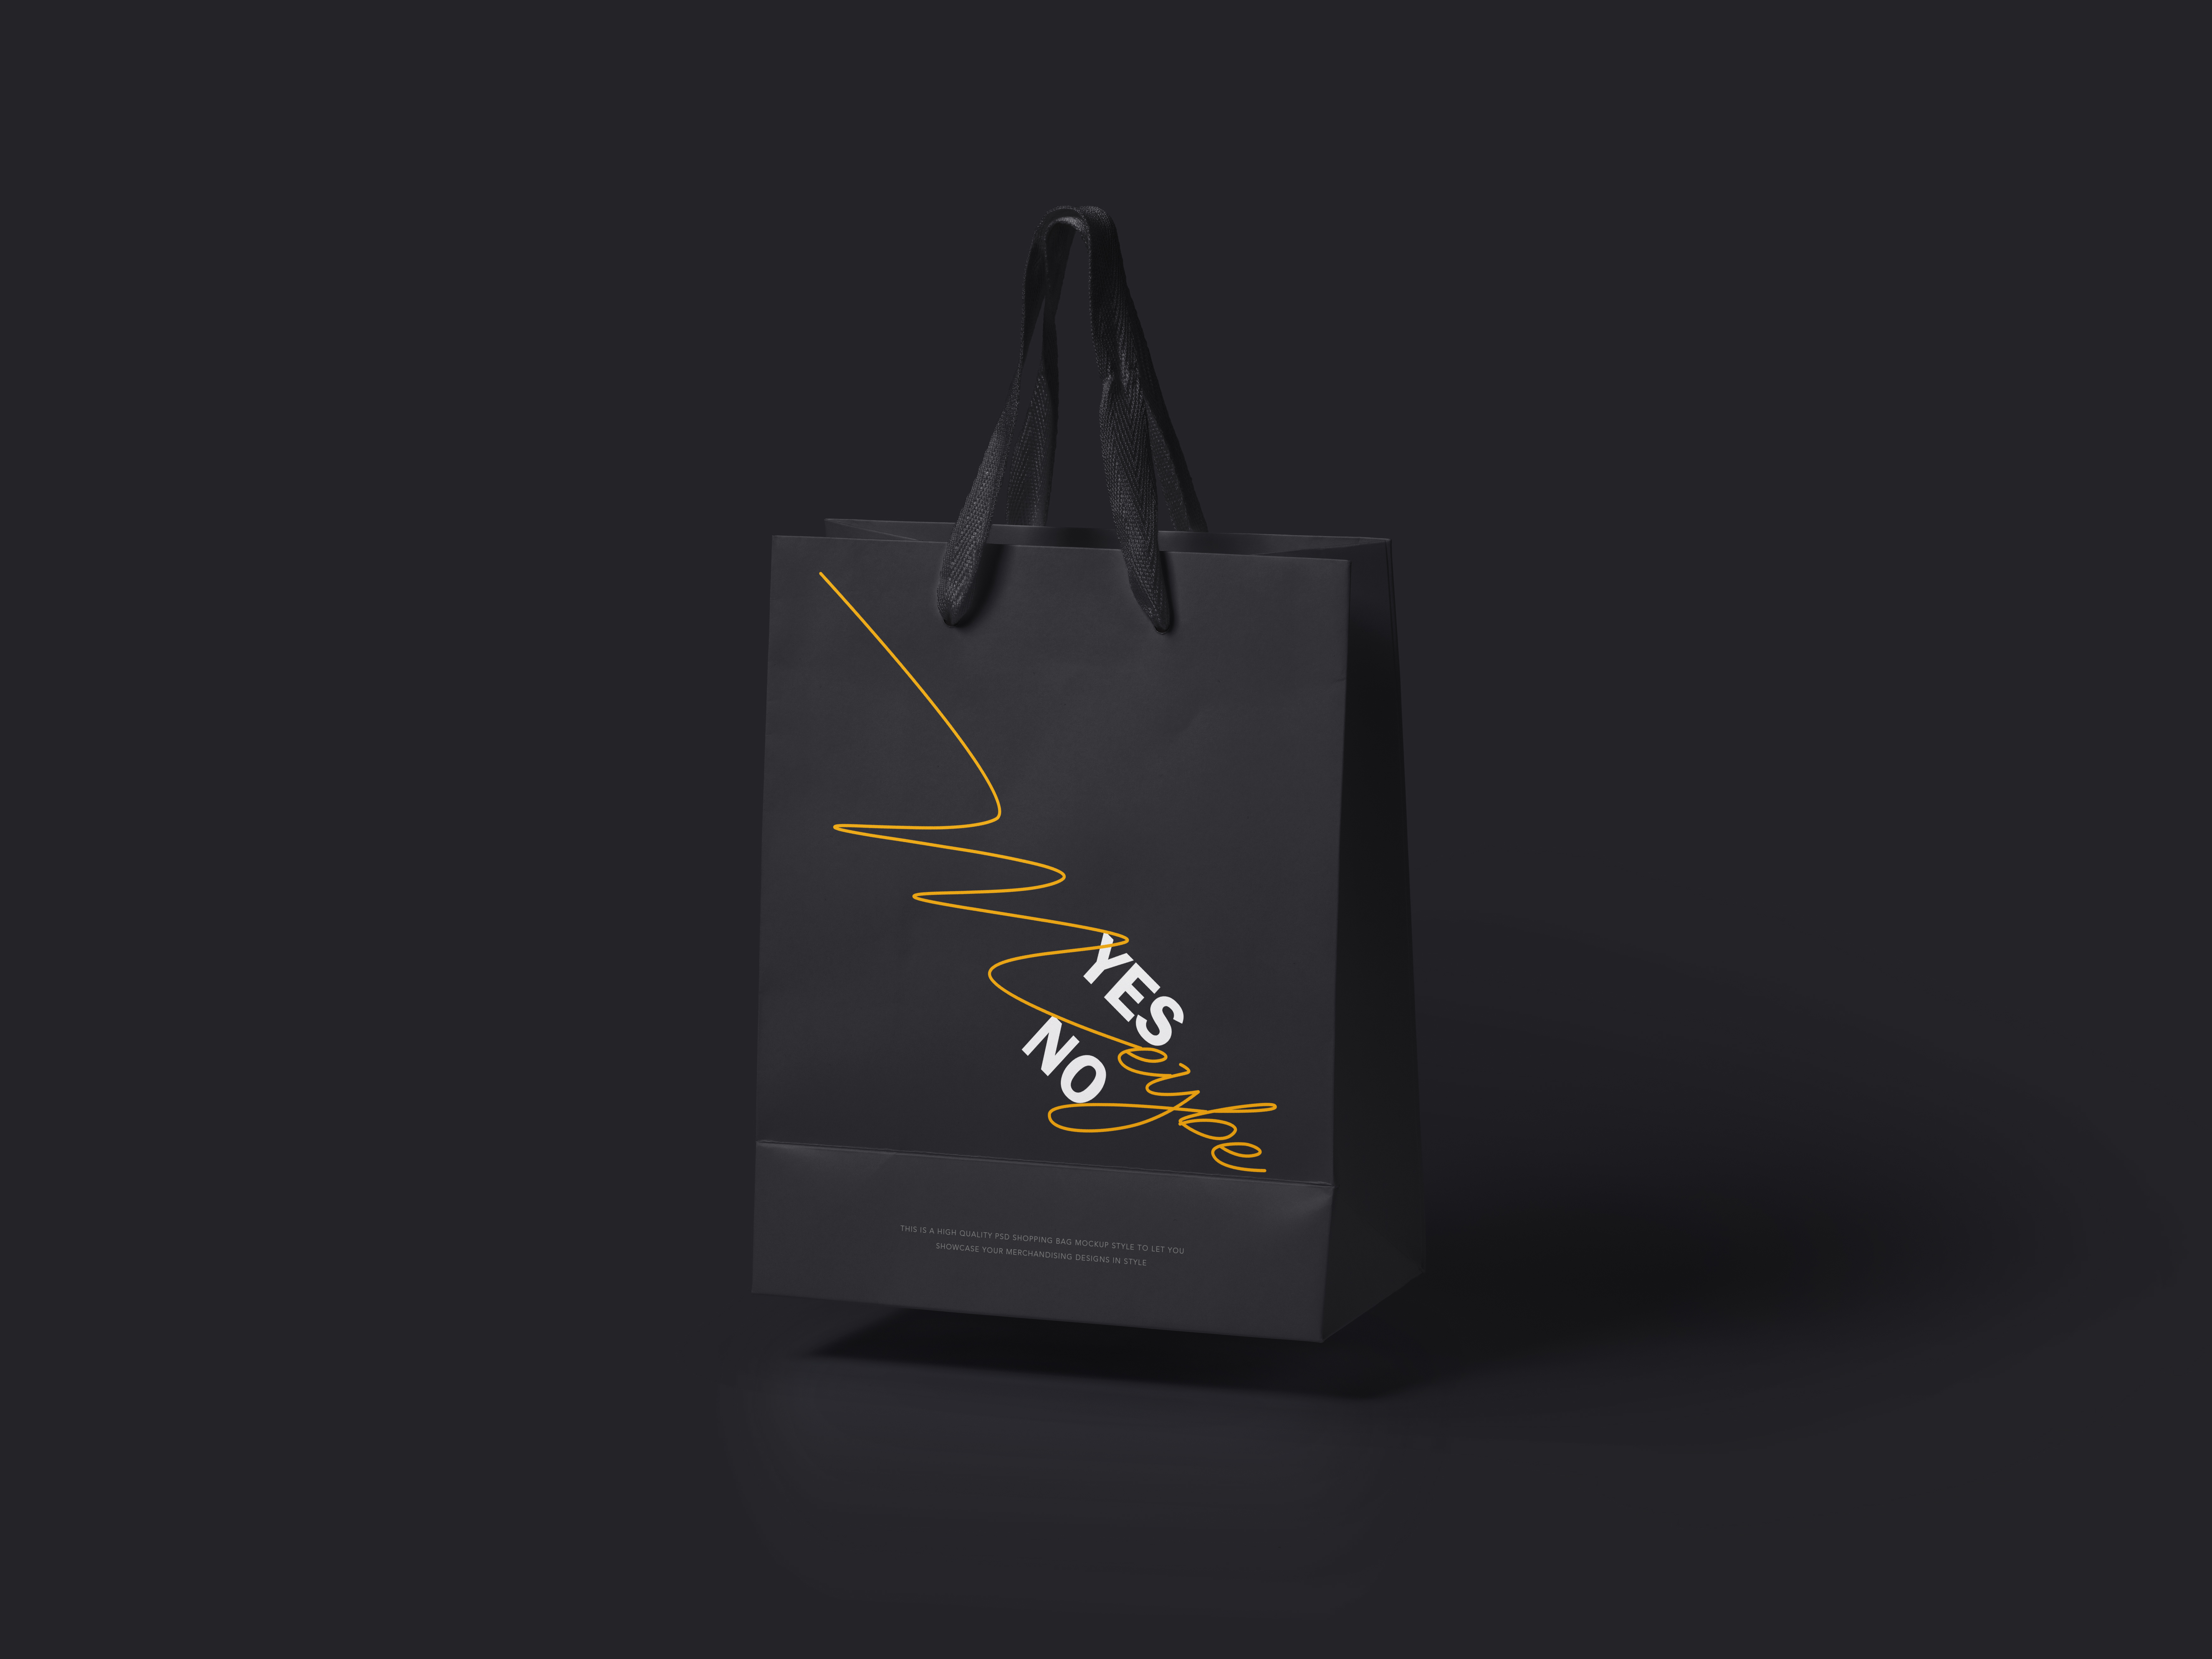 Download Free Branding Mockup Paper Bag Free Psd Mockups Free Psd Mockups Smart Object And Templates To Create Magazines Books Stationery Clothing Mobile Packaging Business Cards PSD Mockups.